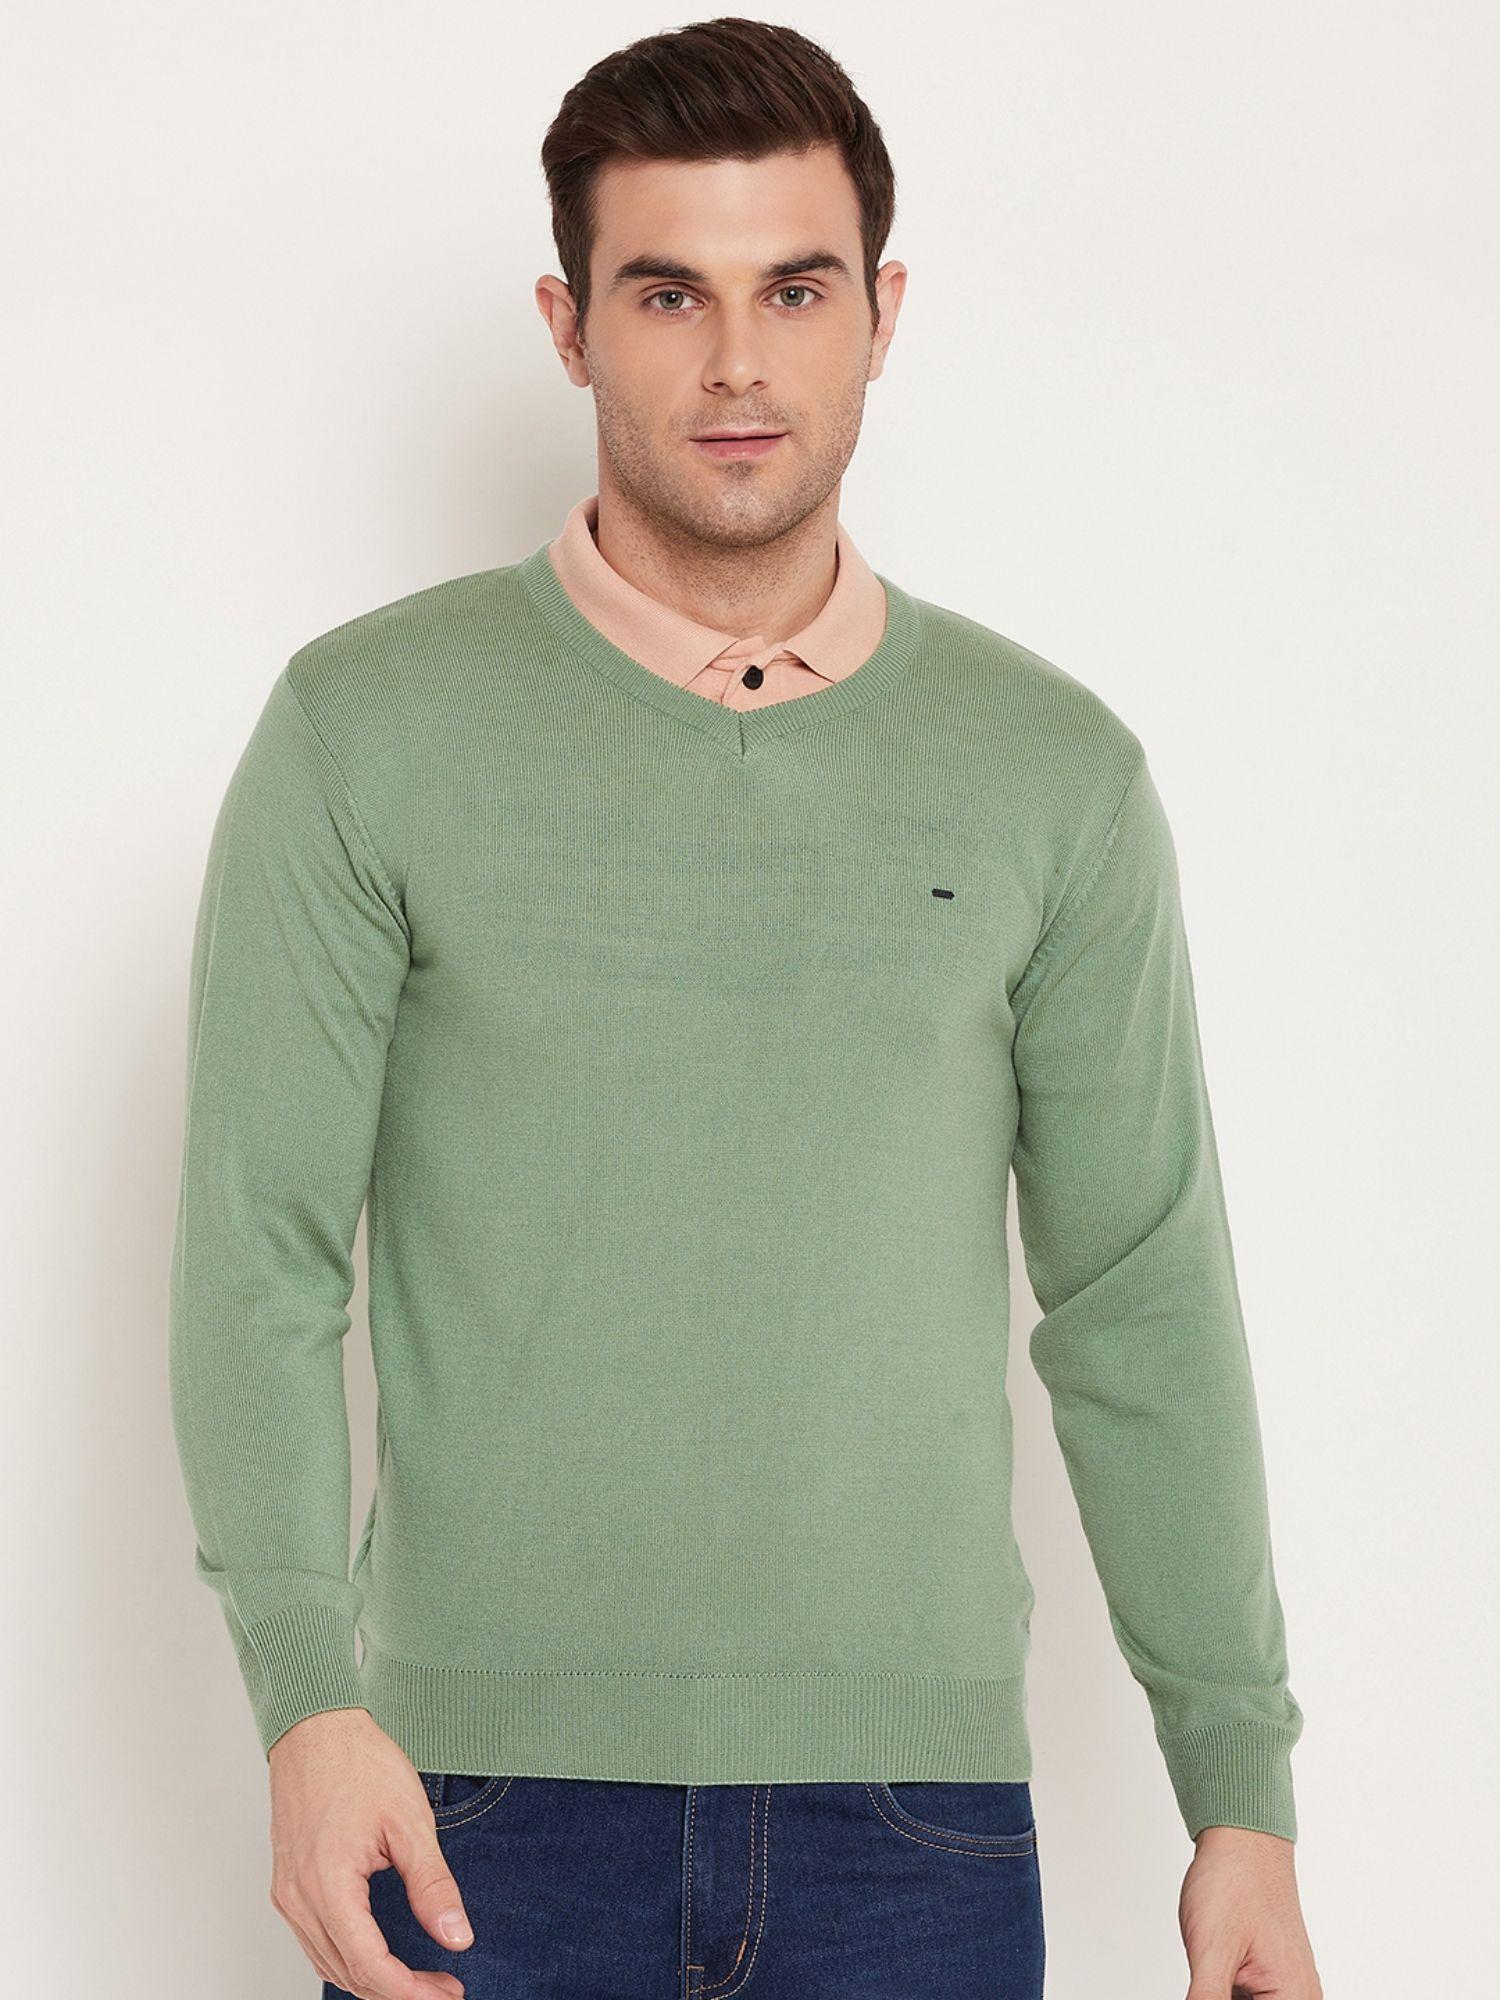 mens green v-neck sweaters